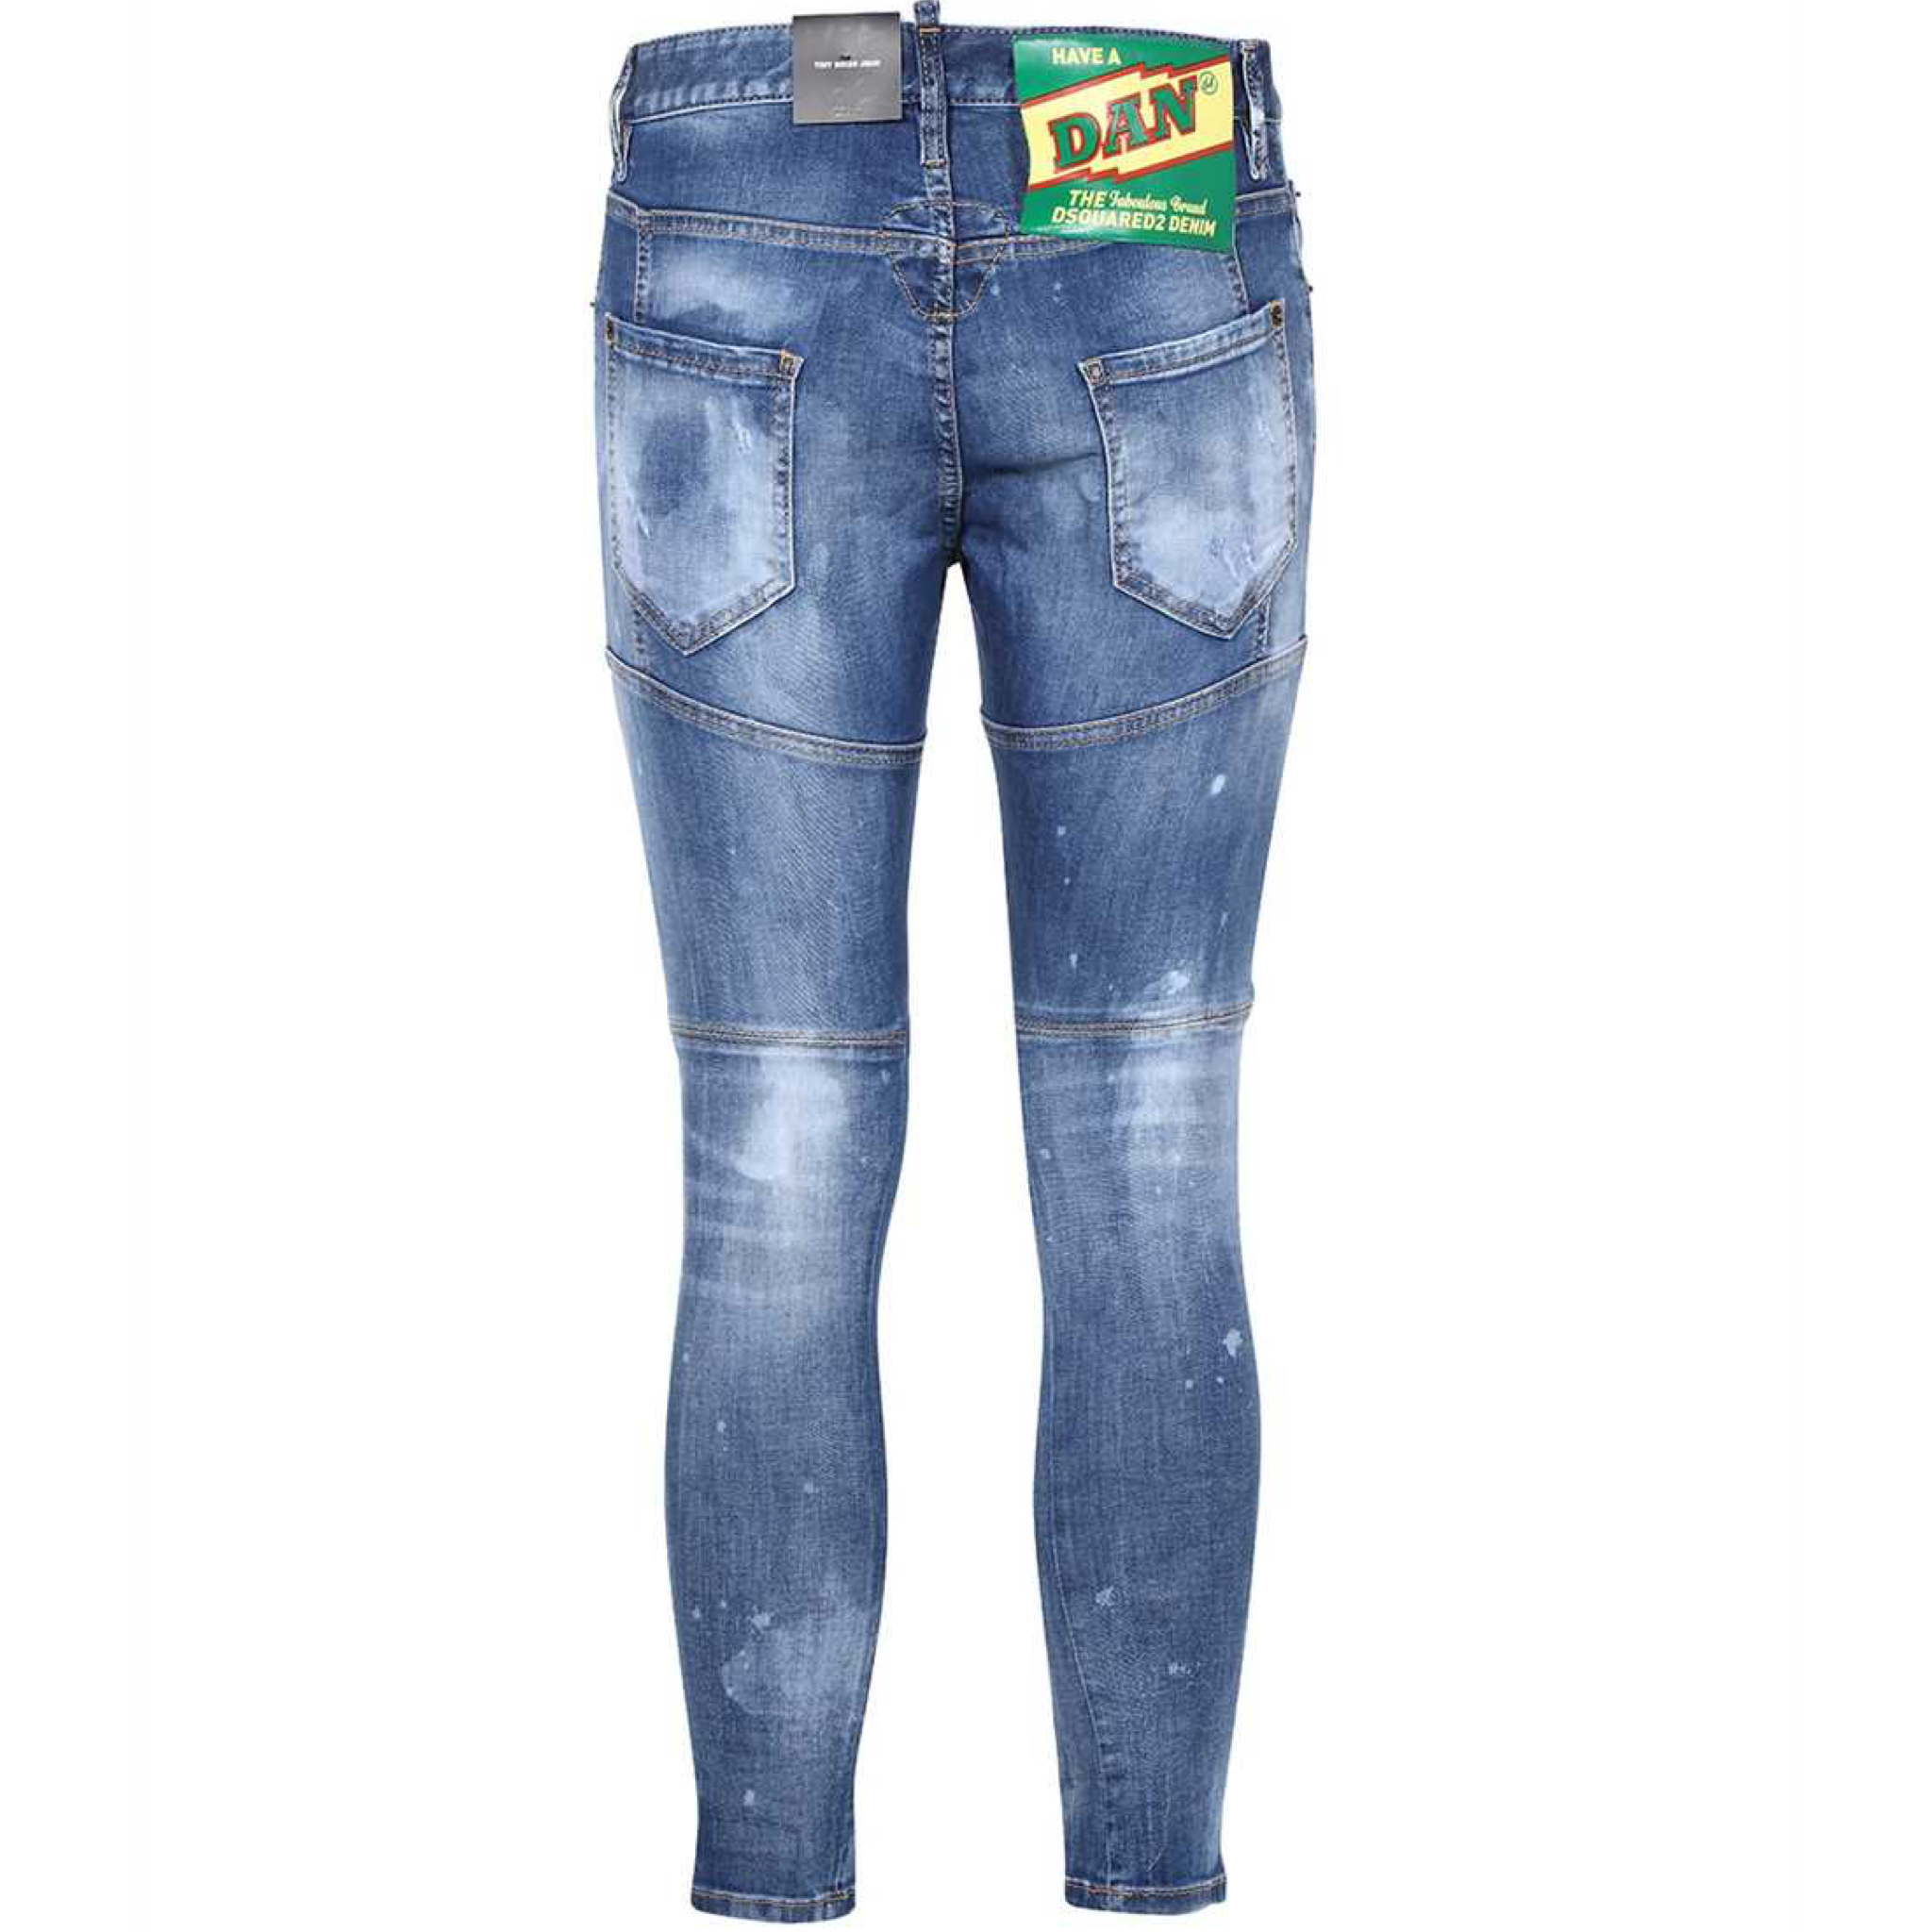 Men's Vintage Ripped Patch Jeans Printed Pattern India | Ubuy